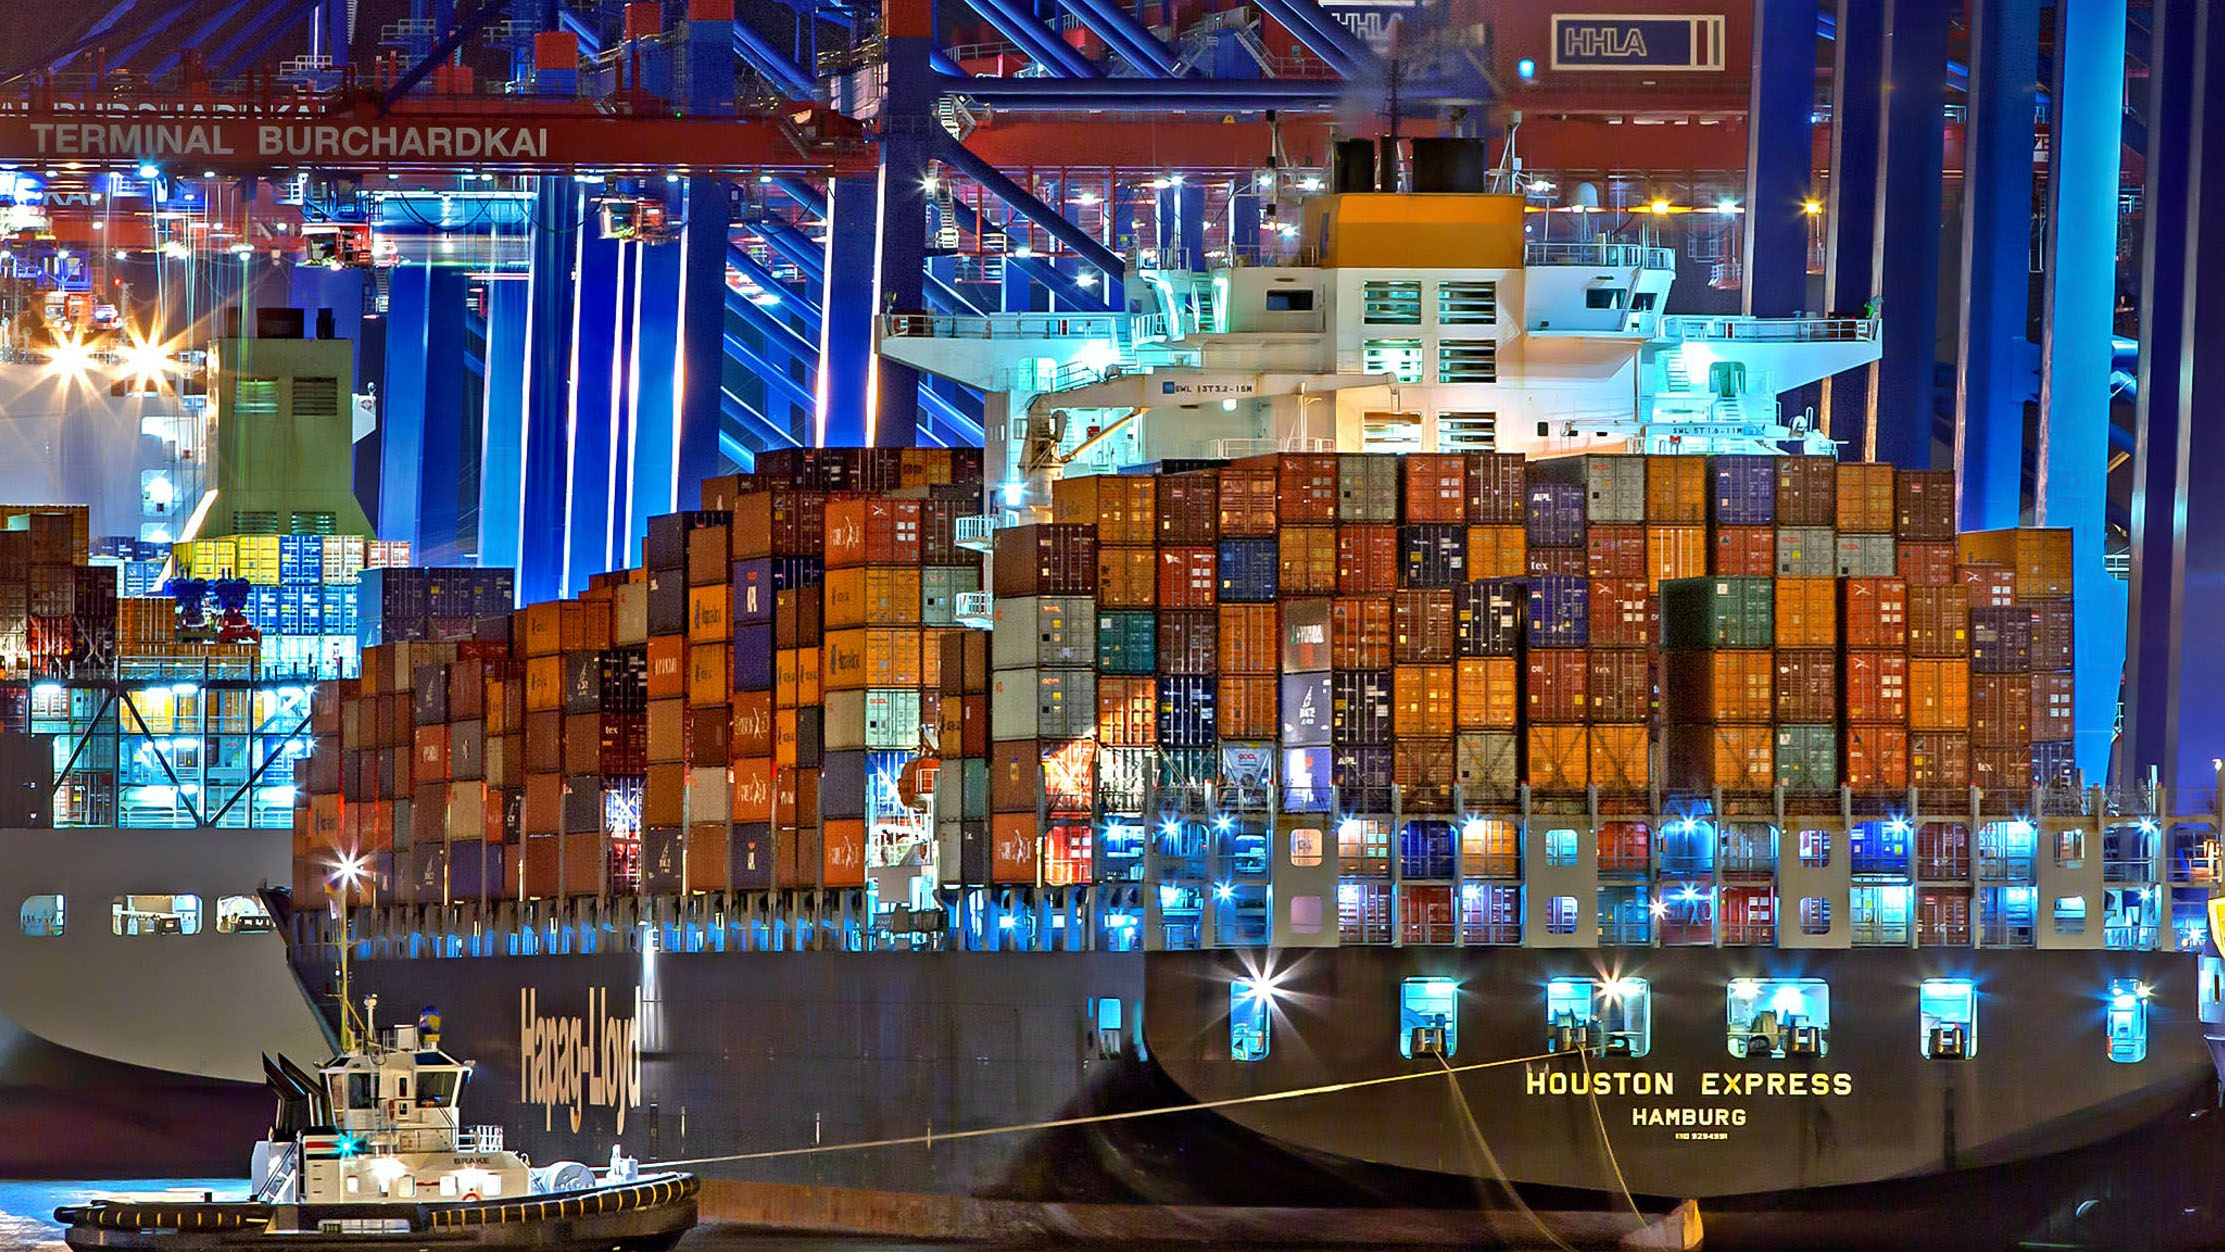 Large cargo ship full of containers at nighttime